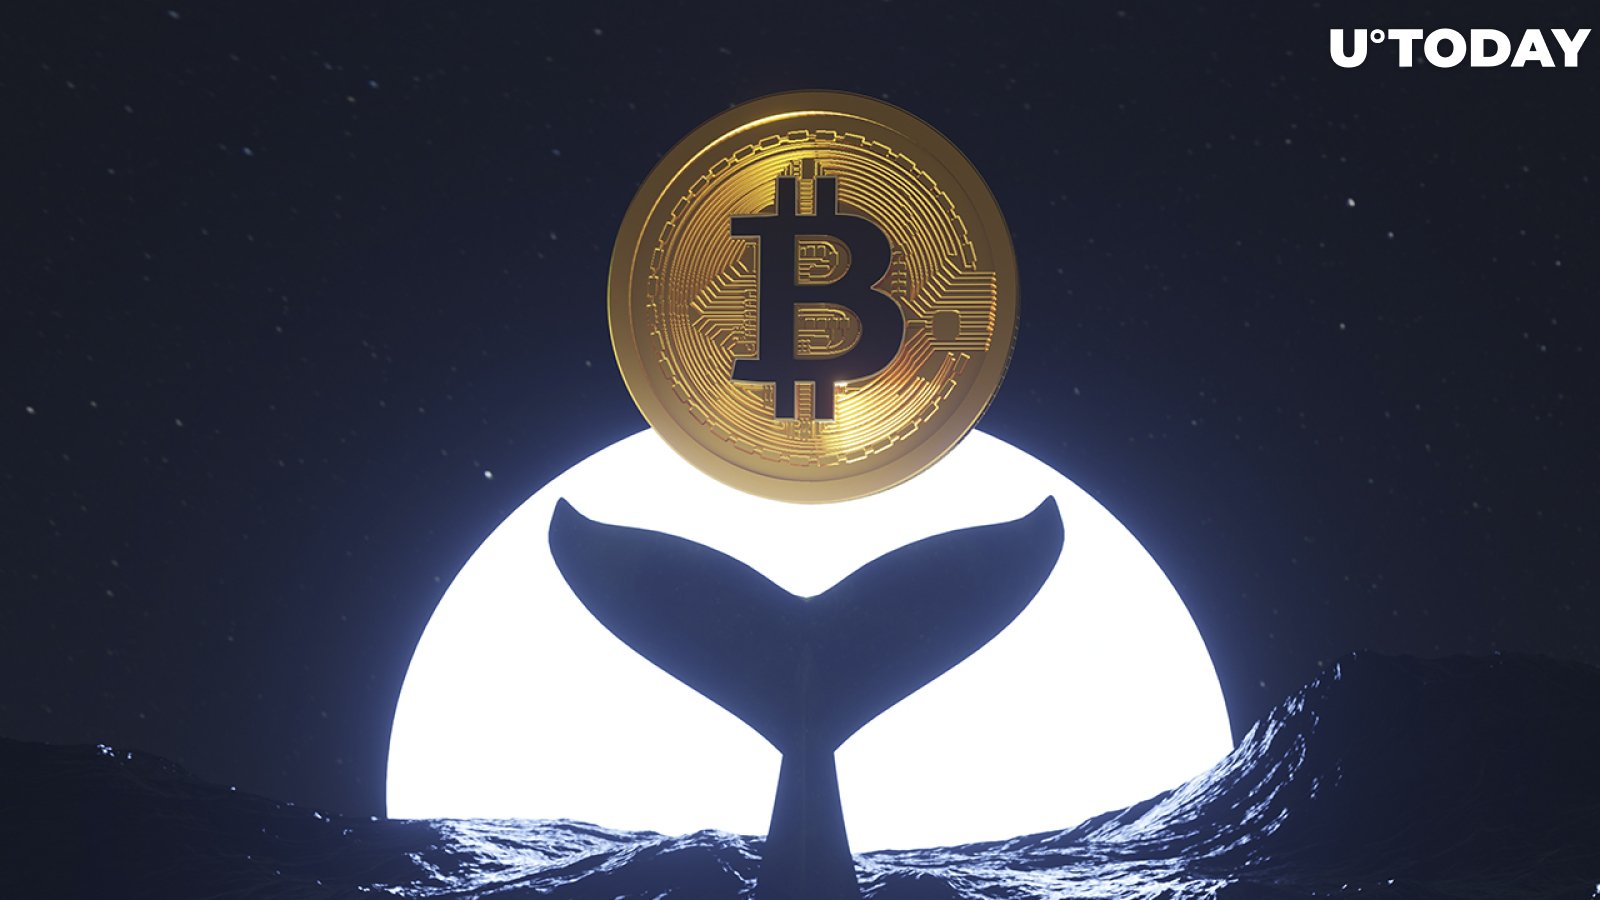 Whales Buy 60K Bitcoins Over Past 2 Months, Adding 1.7 Million BTC in Last 5 Years: Report